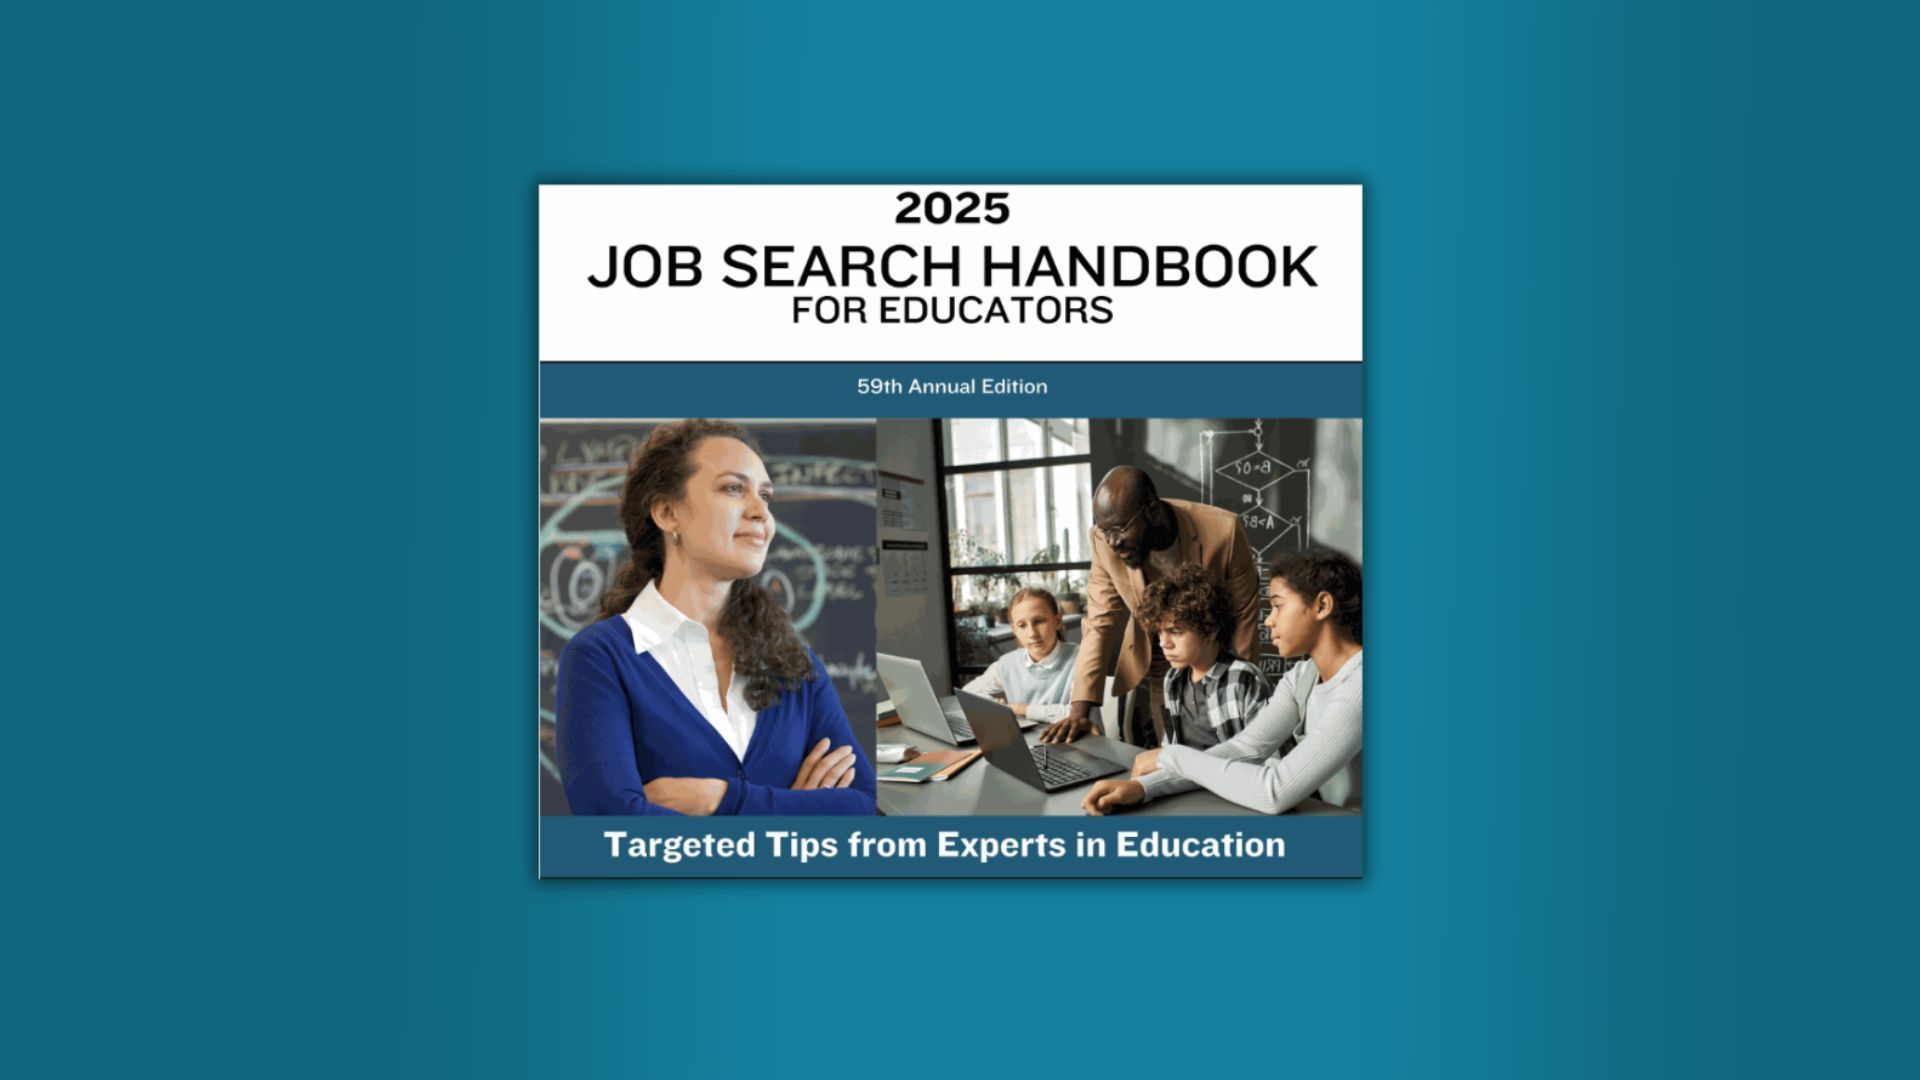 A job search handbook for educators is shown on a blue background.